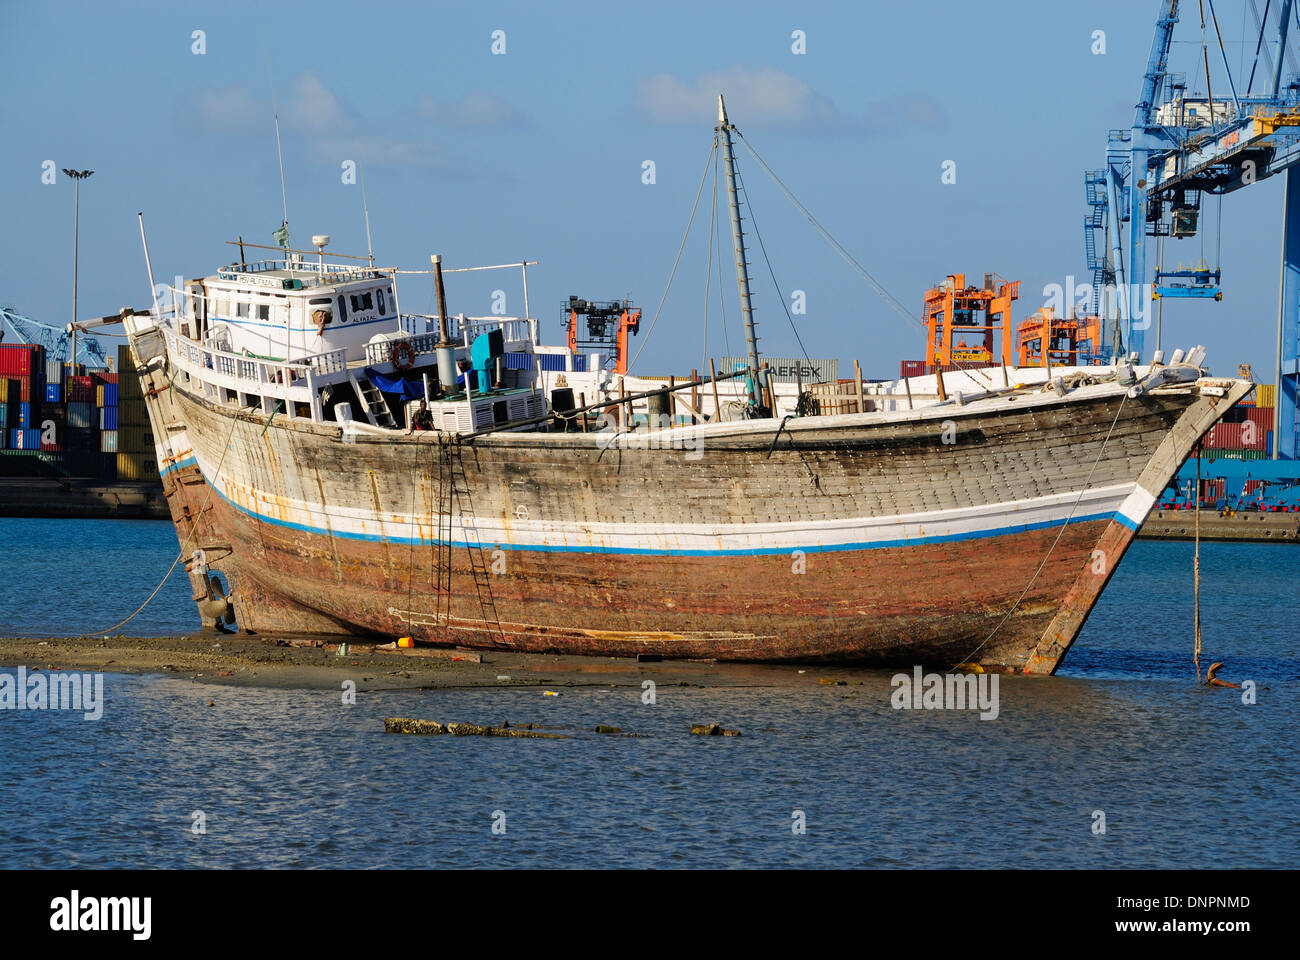 Typical Djiboutian wooden boat used for people transportation in Djibouti city, Djibouti, Horn of Africa Stock Photo